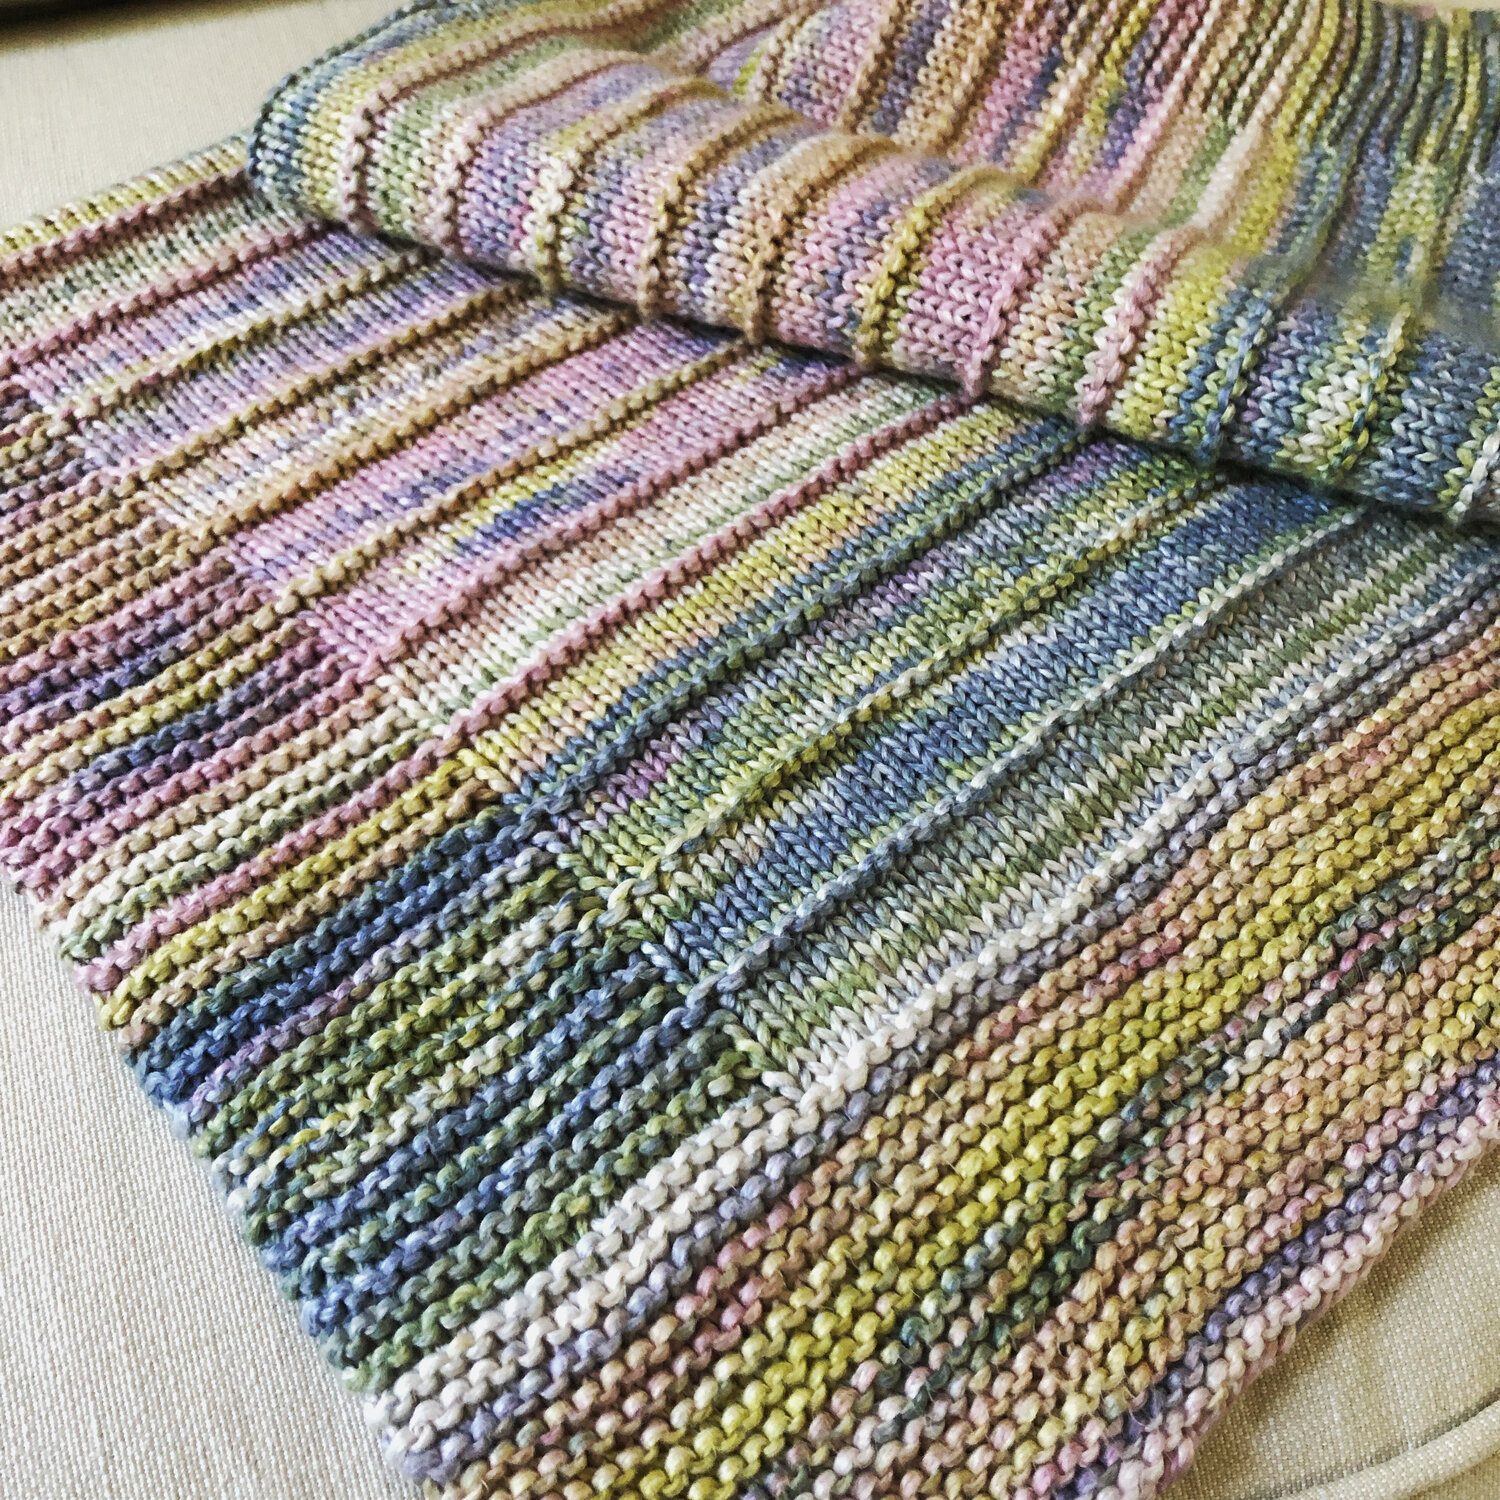 Made by My Friend: A one-of-a-kind baby blanket knitting project with a  beautiful variegated yarn — Fifty Four Ten Studio